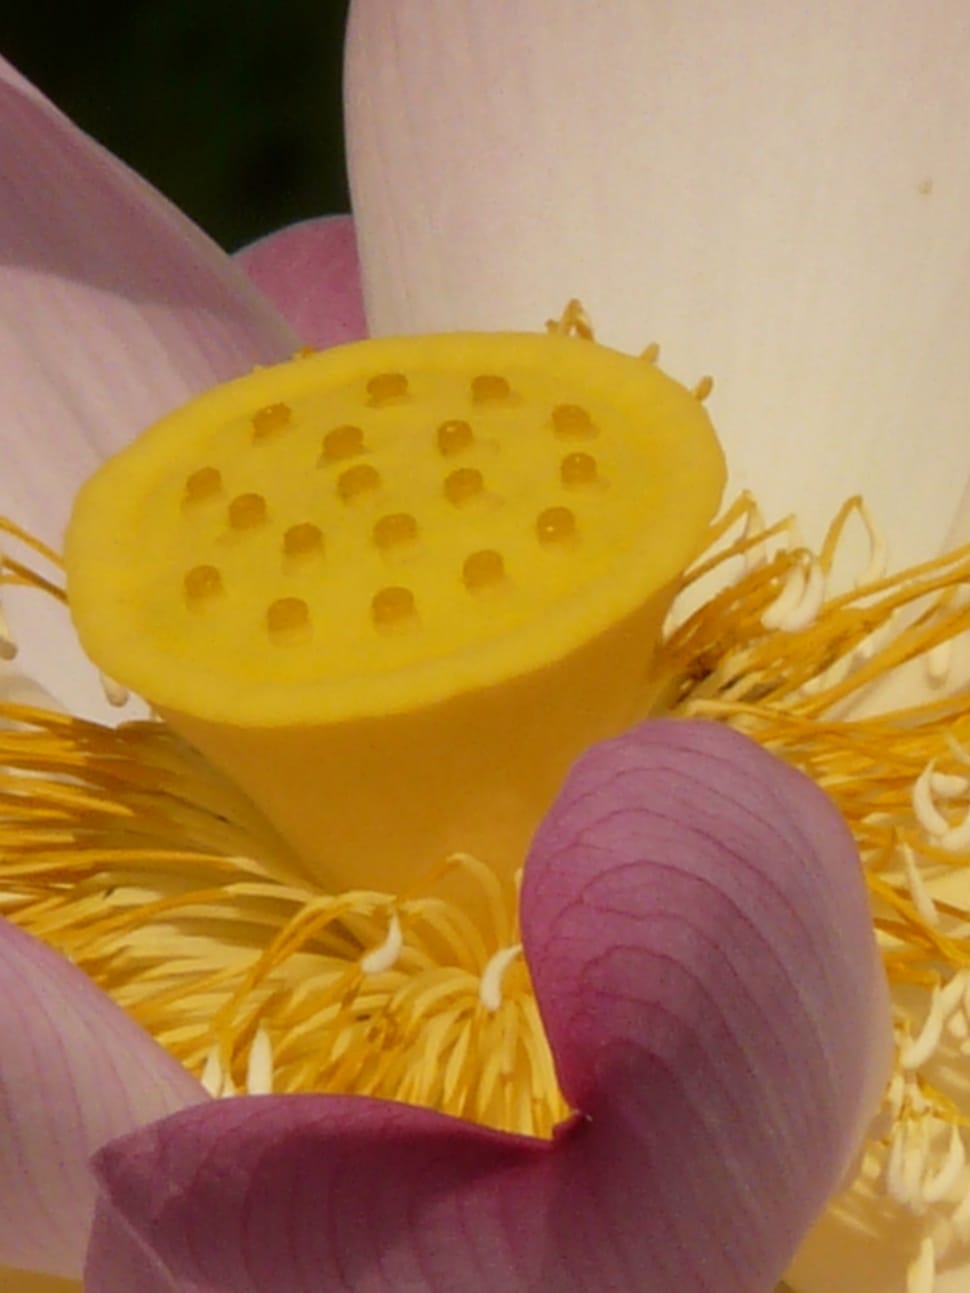 yellow petal flower preview